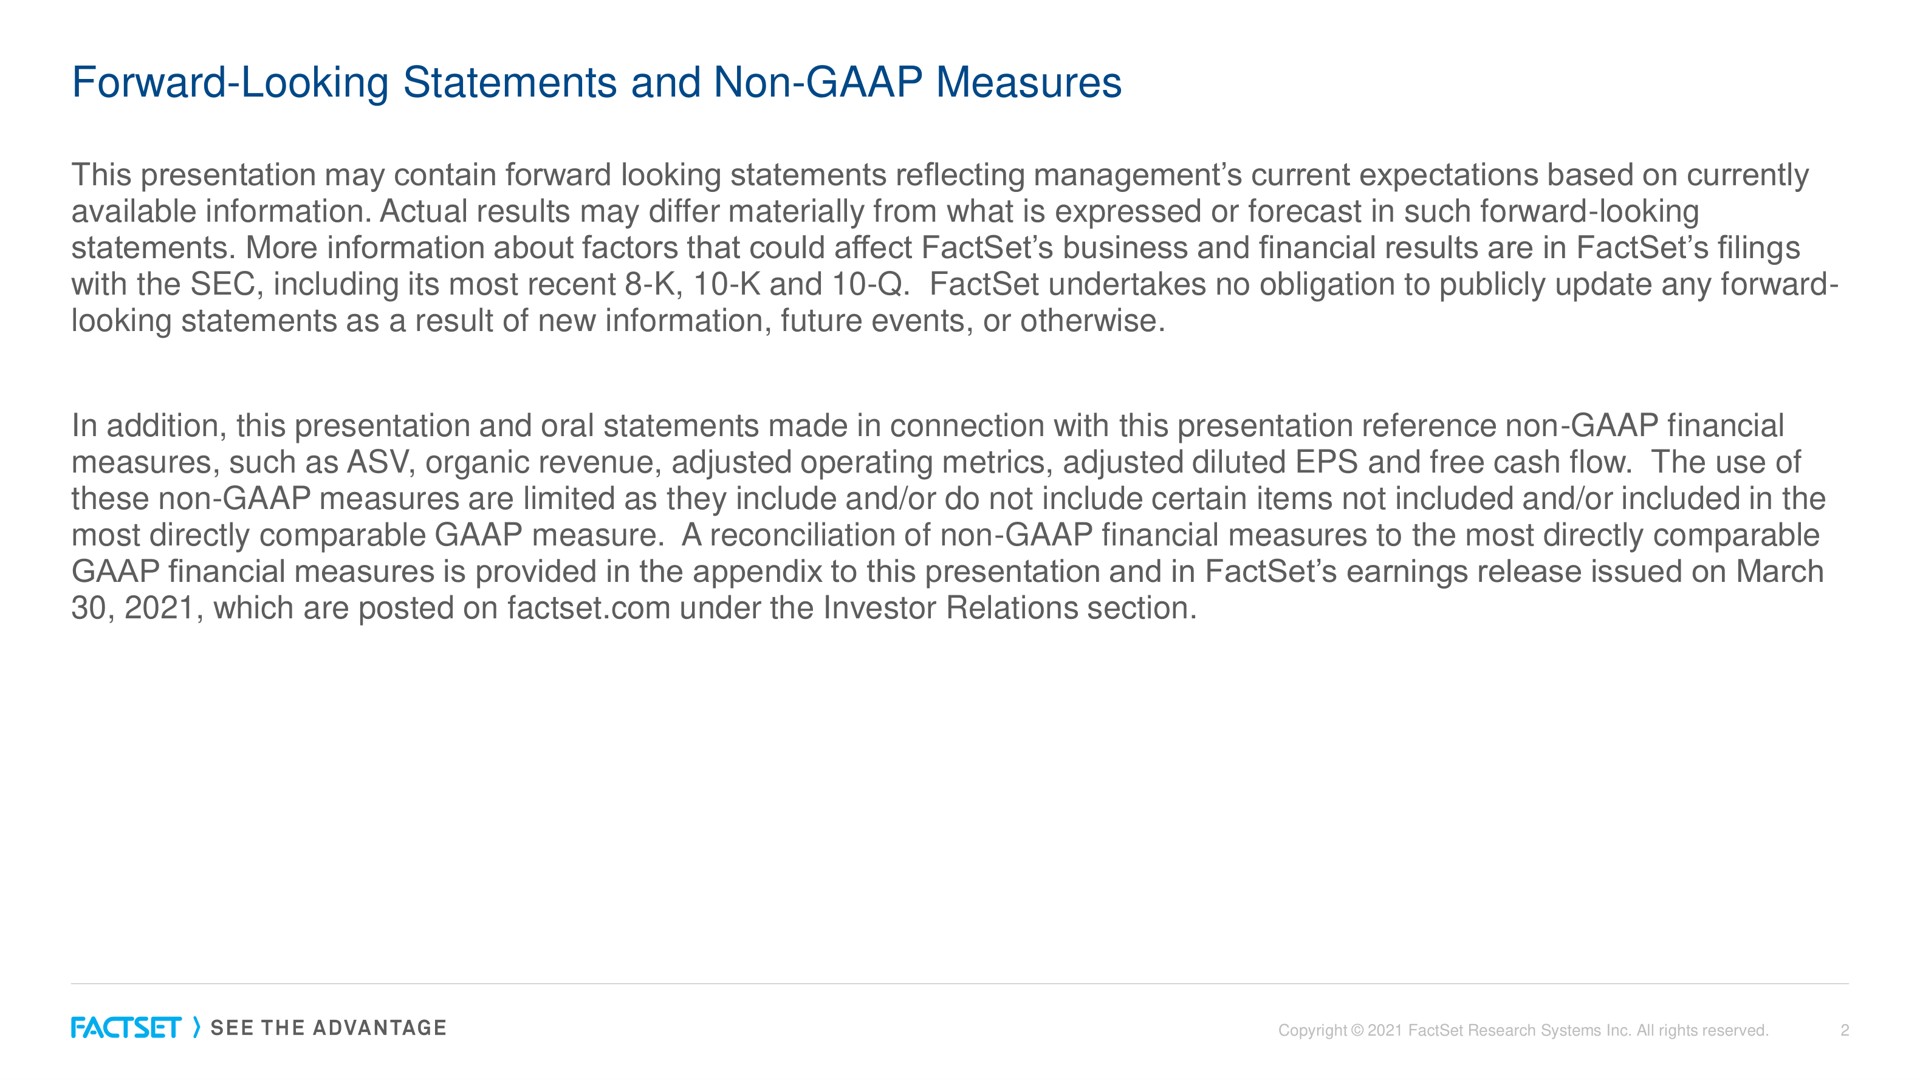 forward looking statements and non measures | Factset